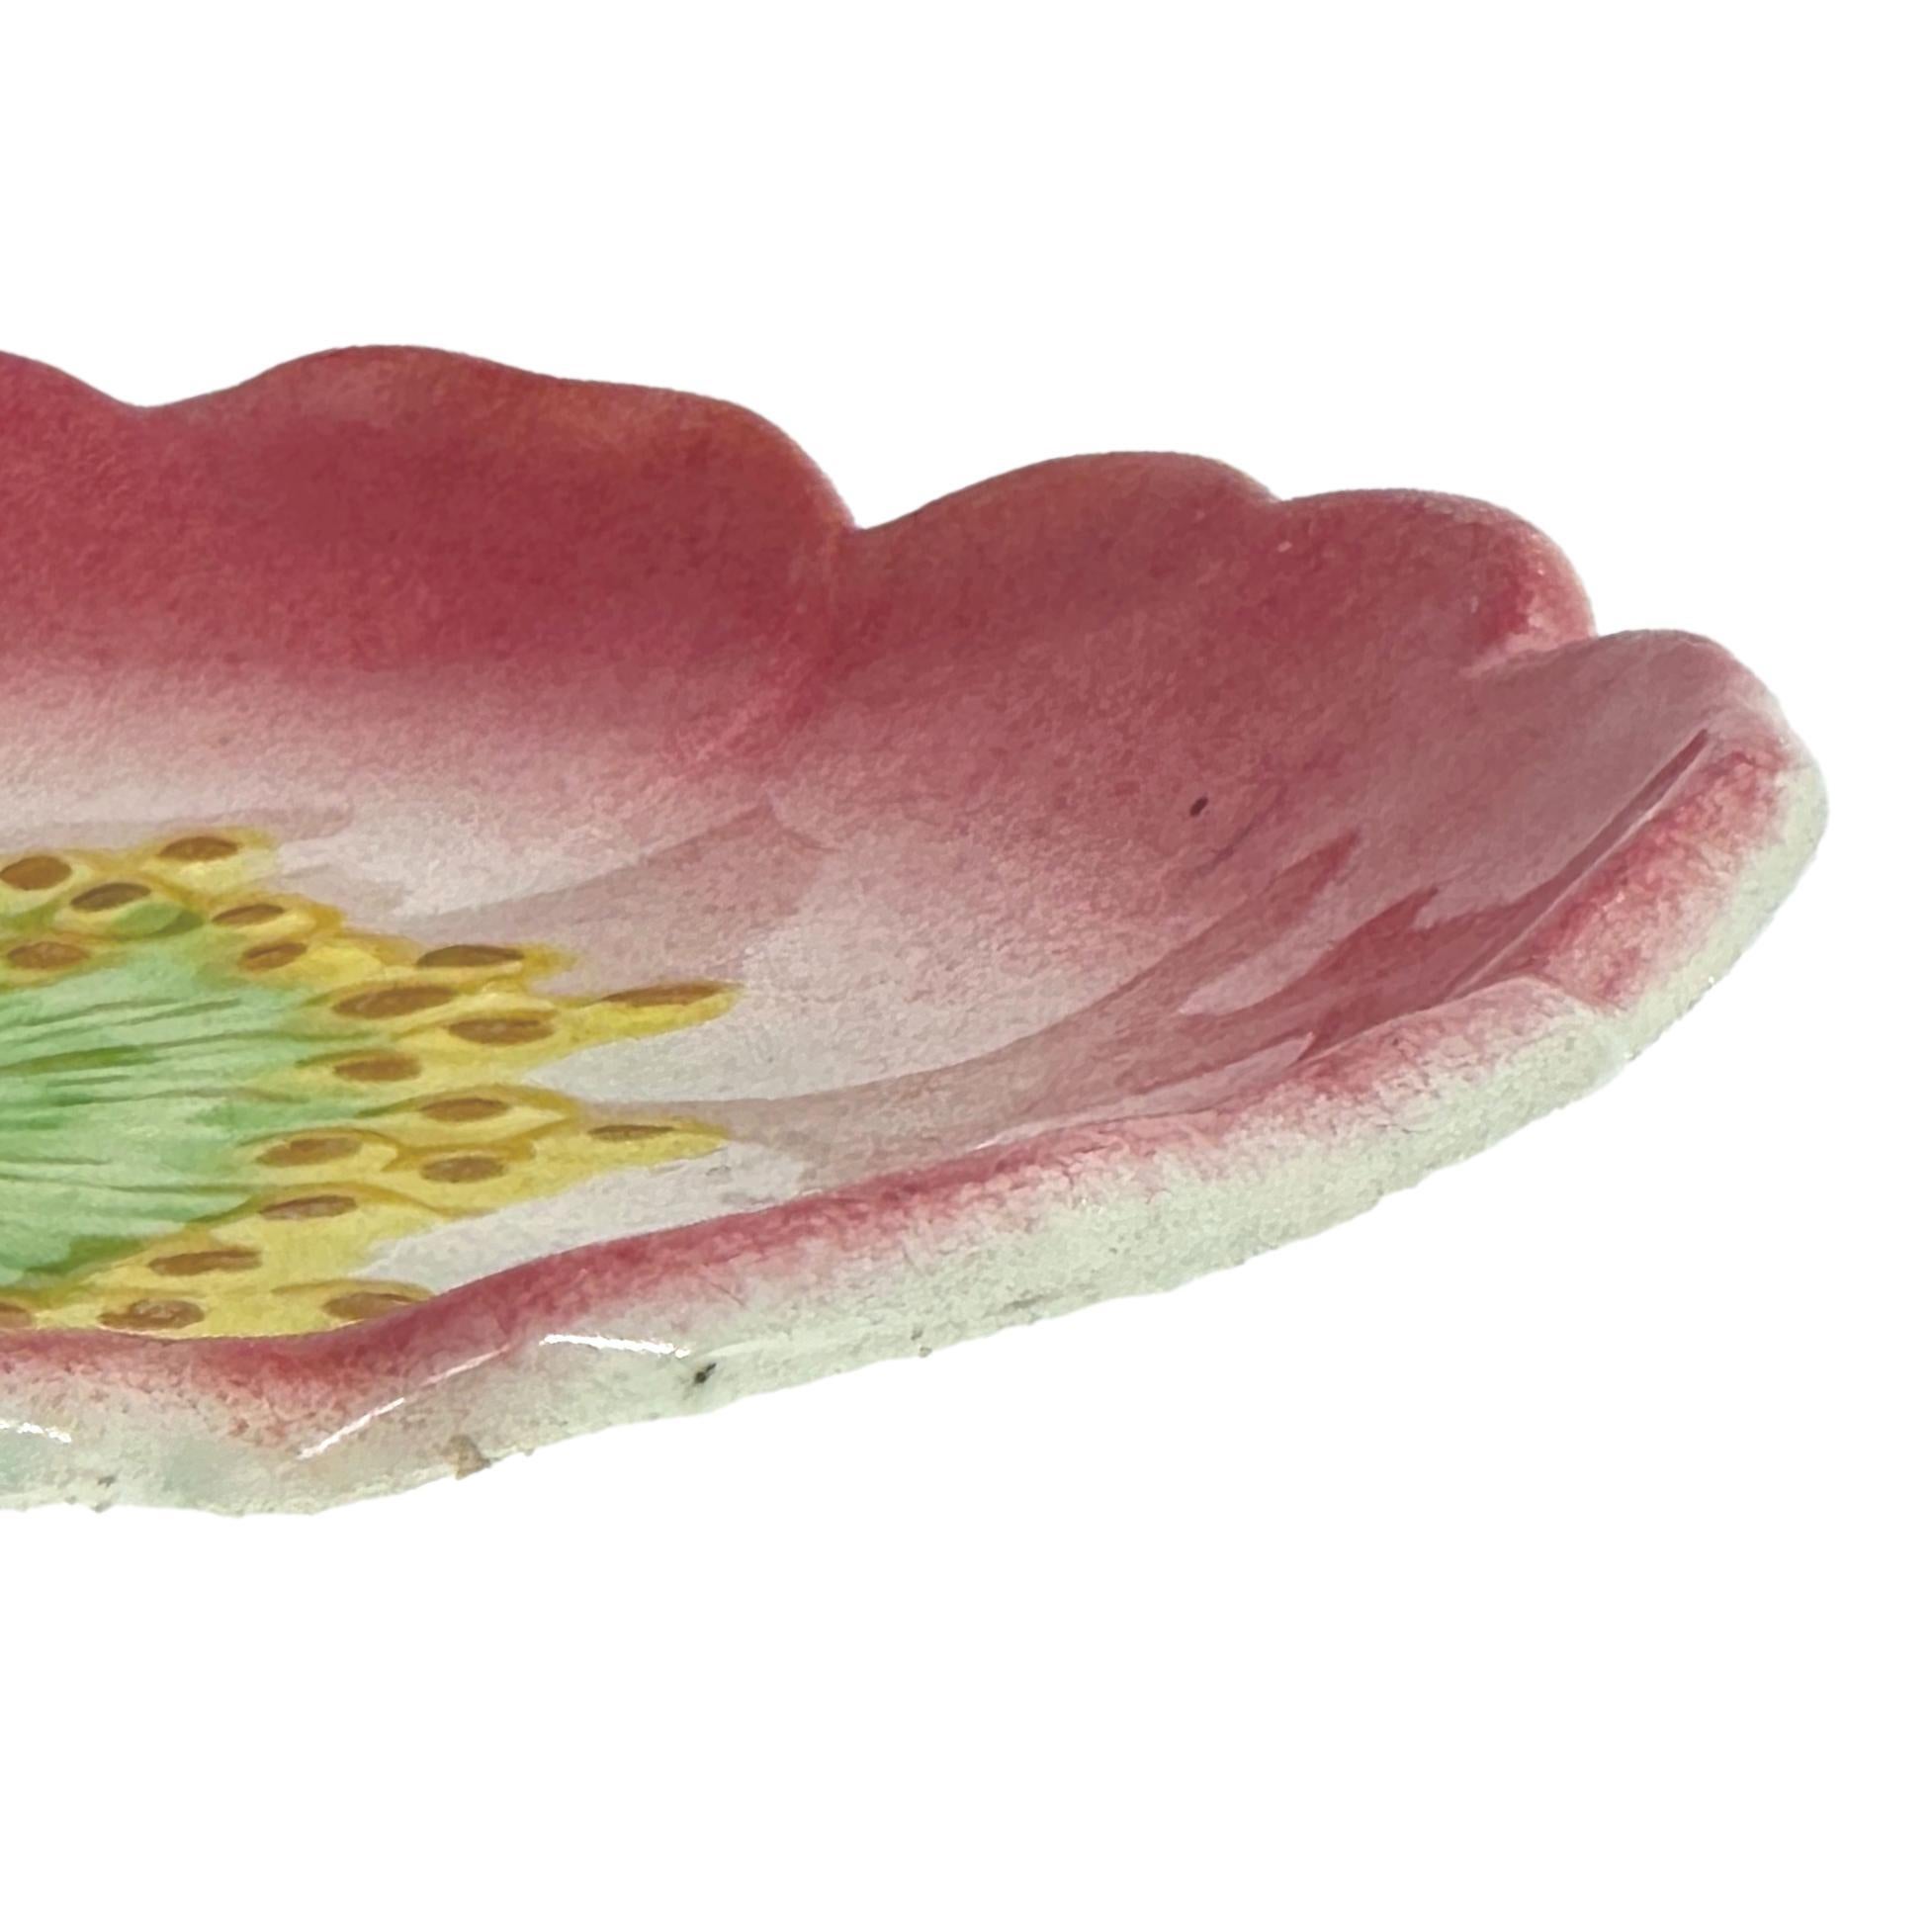 A Jerome Massier Majolica (Barbotine) Trompe l'oeil Dish, naturalistically molded as a rosehip flower glazed in pink, green, yellow, and ochre, the reverse with impressed oval mark 'J. MASSIER VALLAURIS, PIERRE PERRET SUCr.', French, ca. 1880.